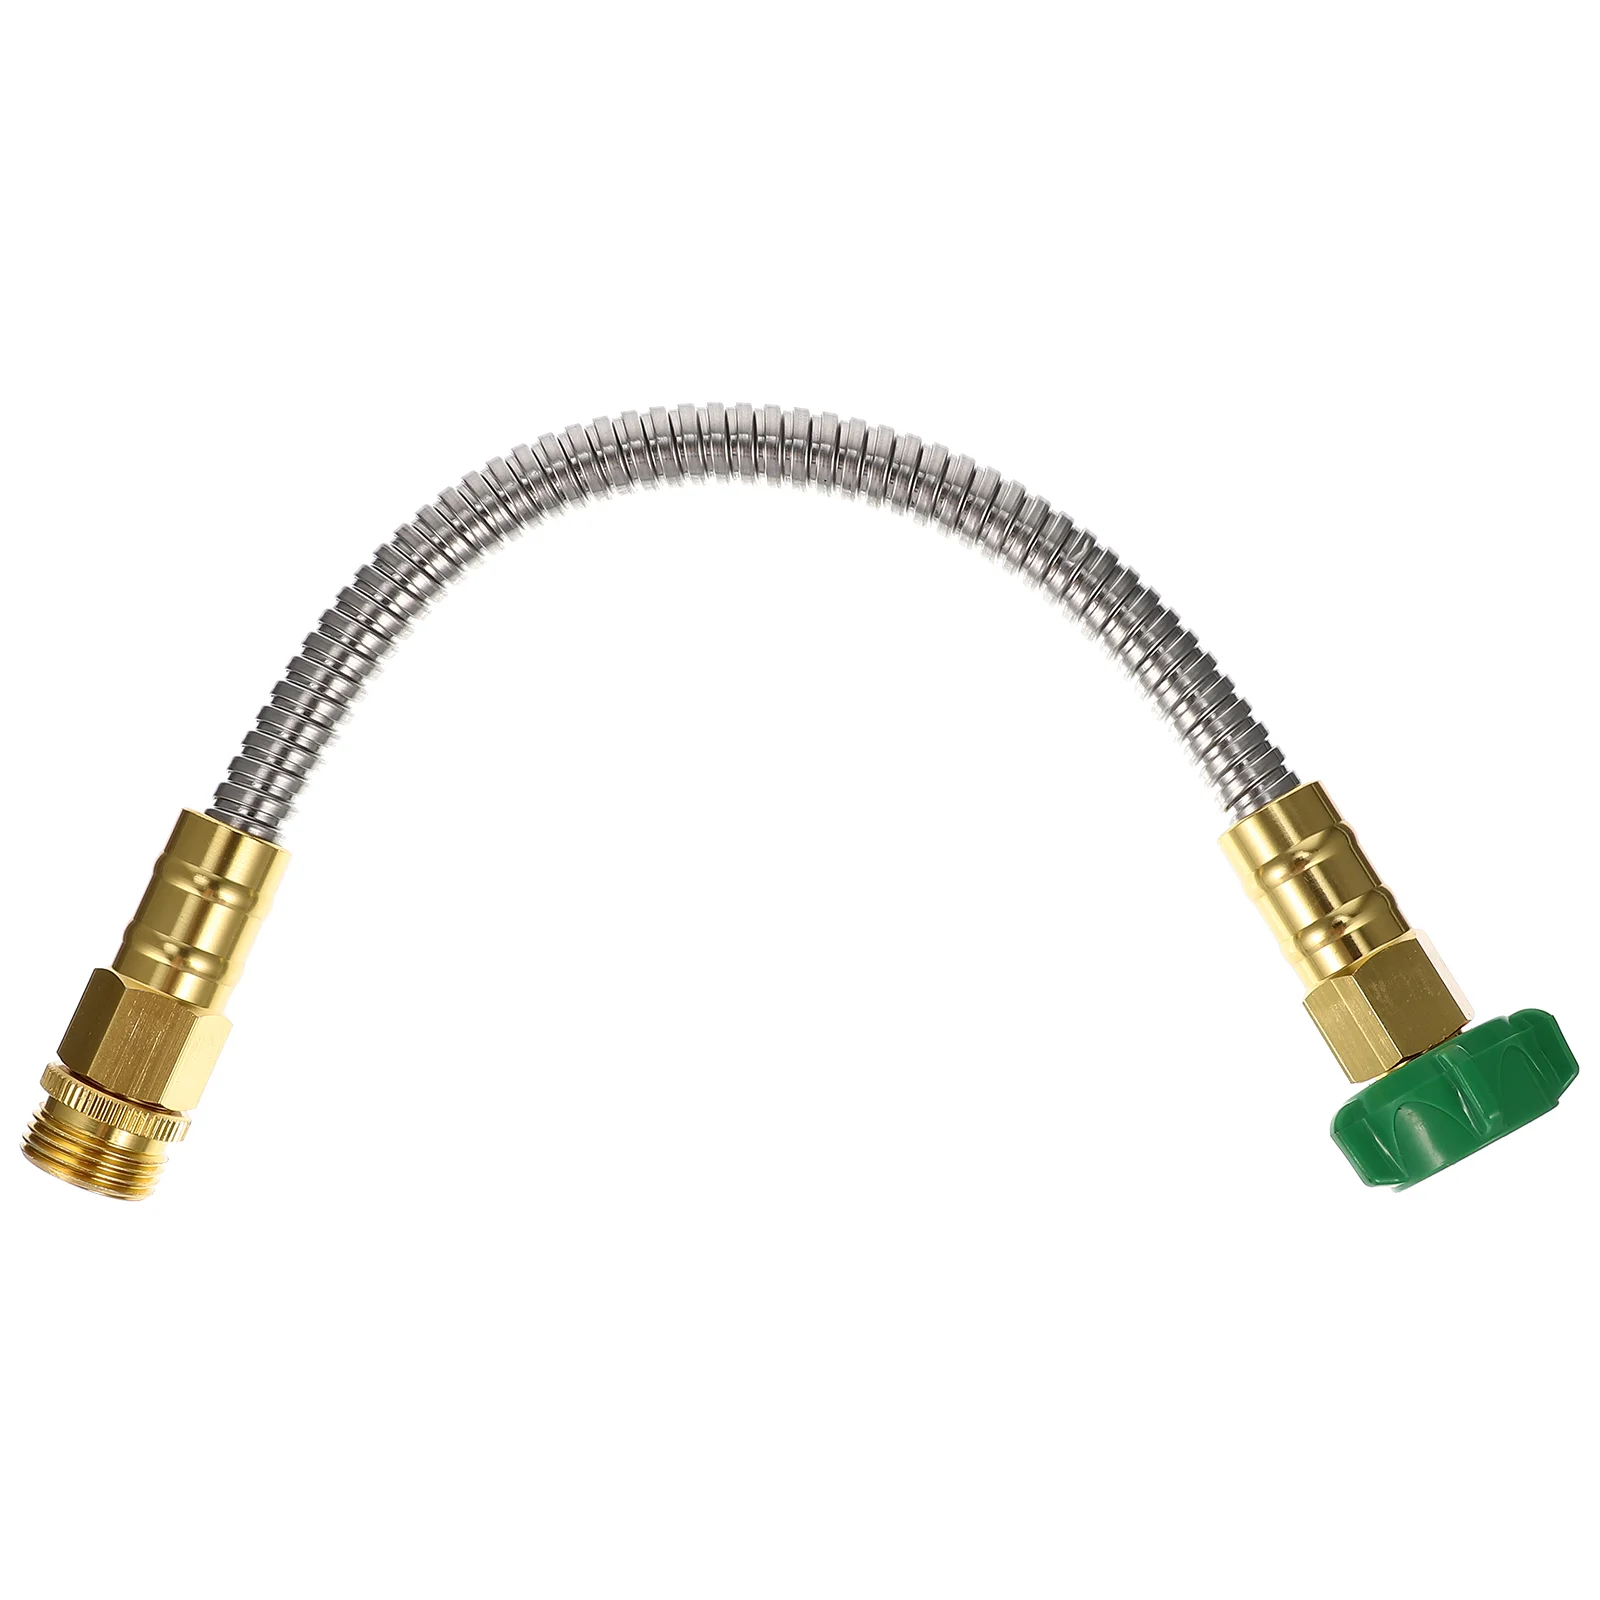 

Hose Water Garden Steel Stainless Extension Metal Flexible Short Connector 1Ft Female Extender Tube Irrigation Duty Heavy